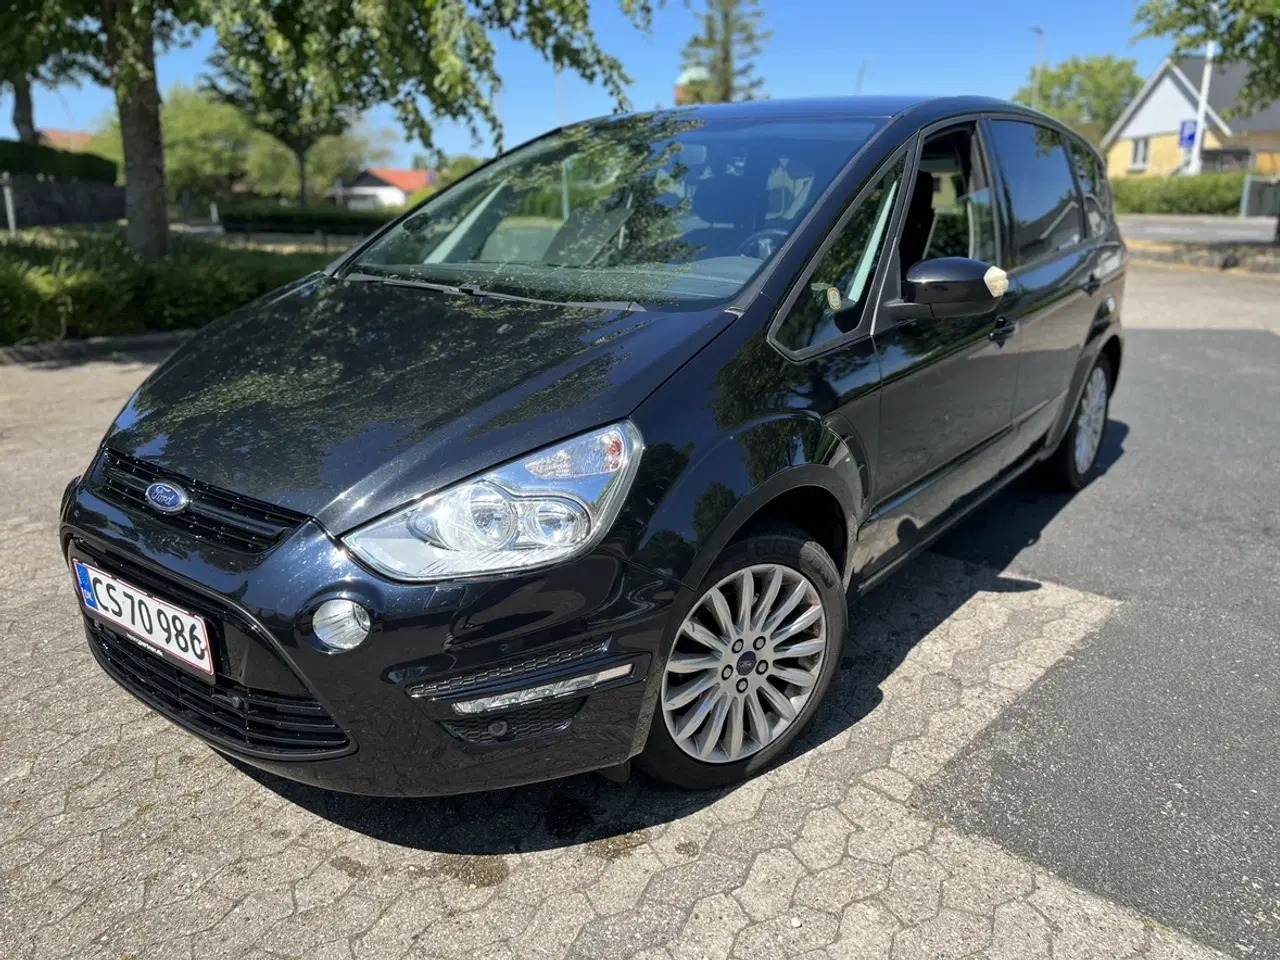 Billede 5 - Ford S Max 5 Pers. 